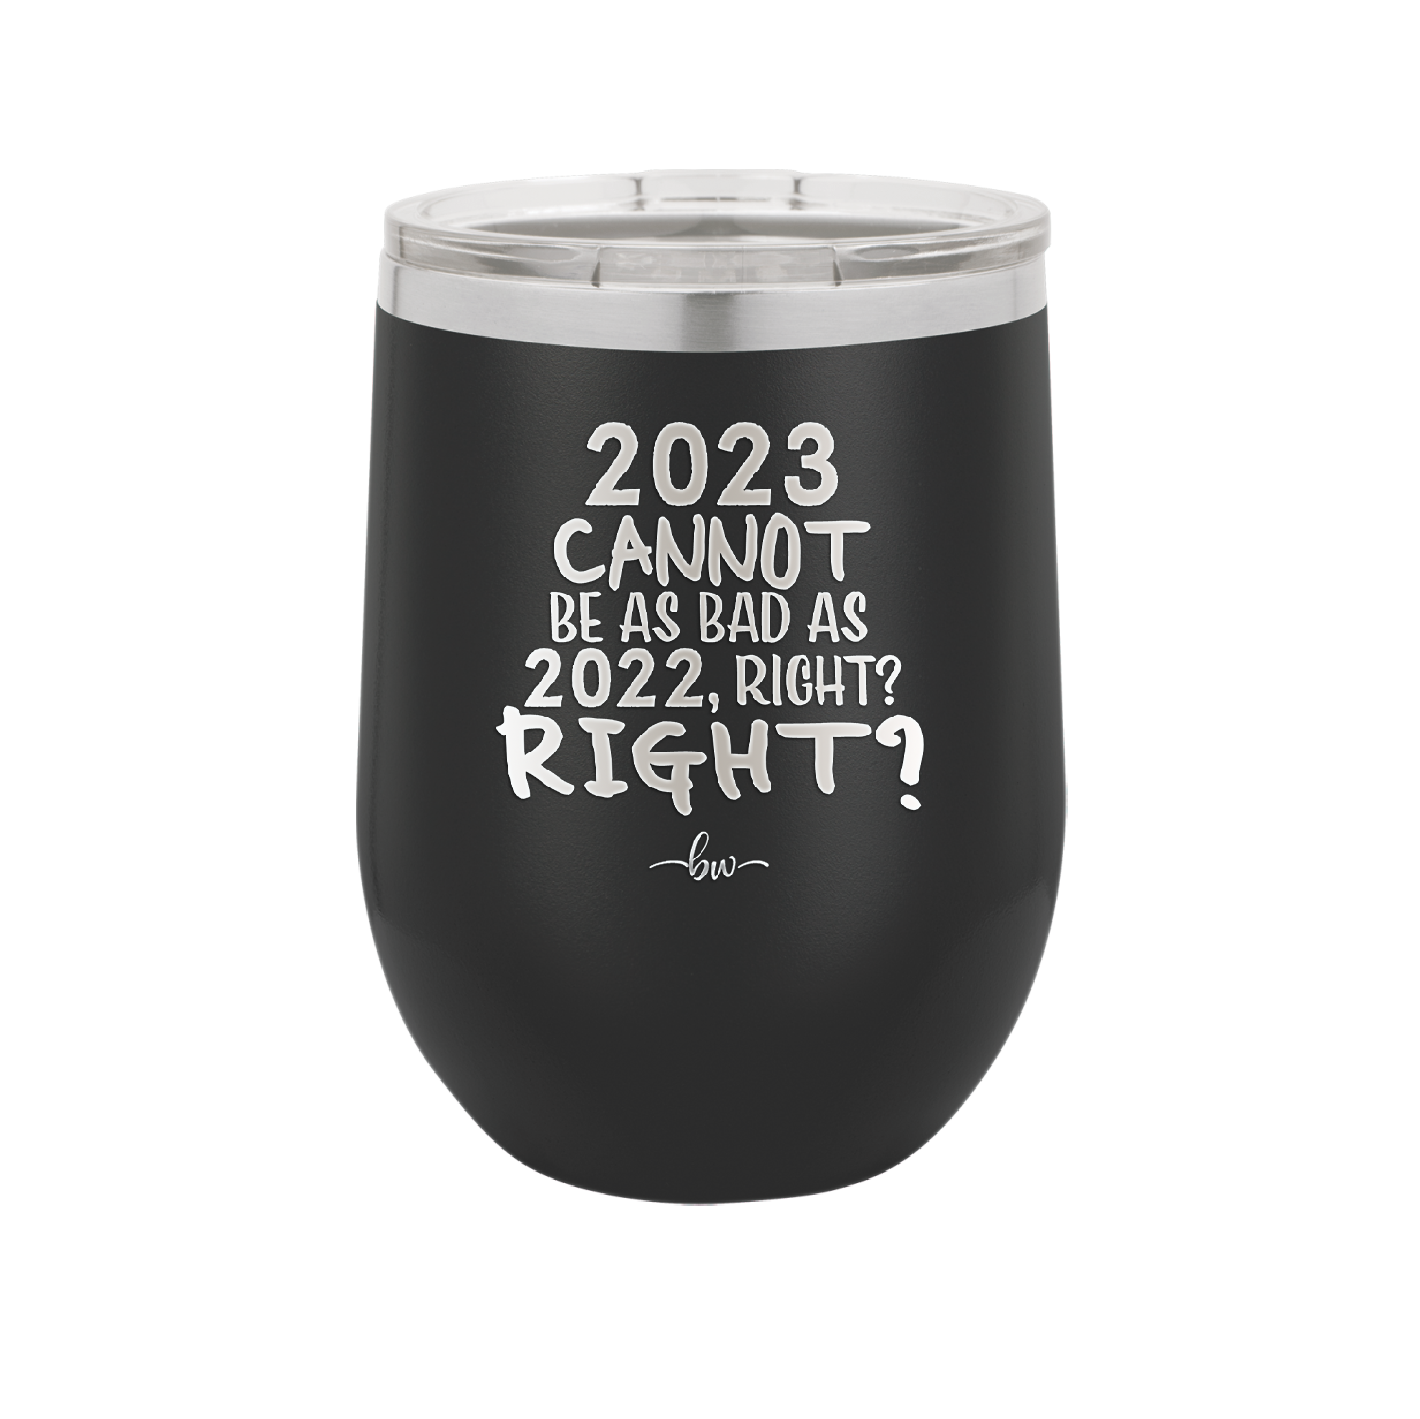 12 oz wine cup 2023 cannot be as bas as 2022, right?right? - black